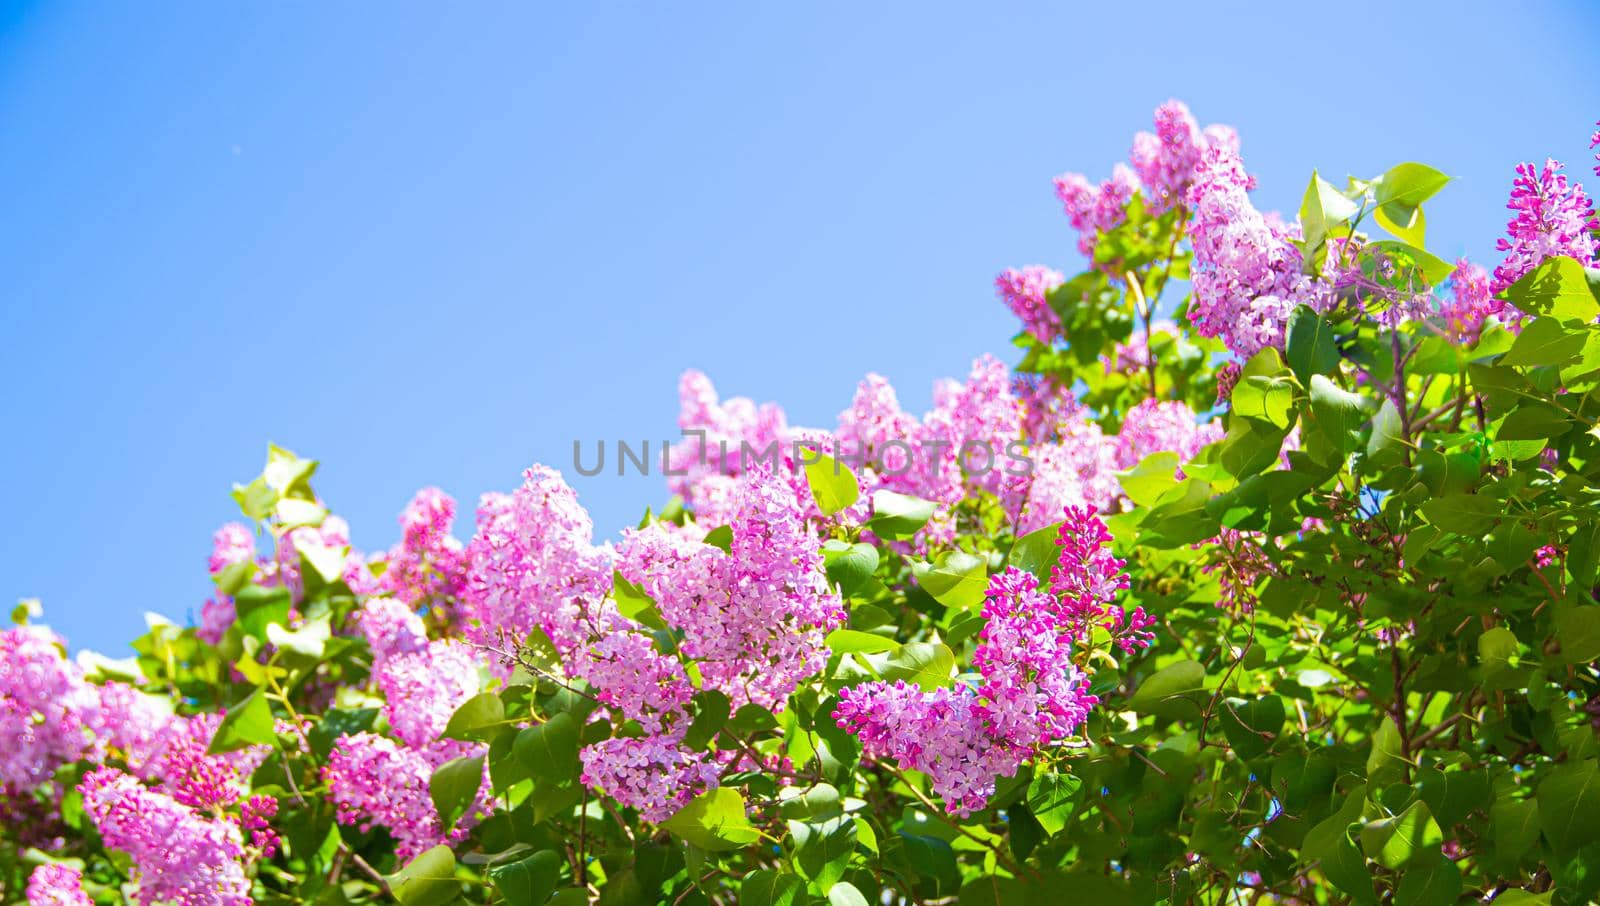 Lilac branches on a background of blue sky. Flowering bush. Blue sky. pink lilac. Summer. Copy spase.